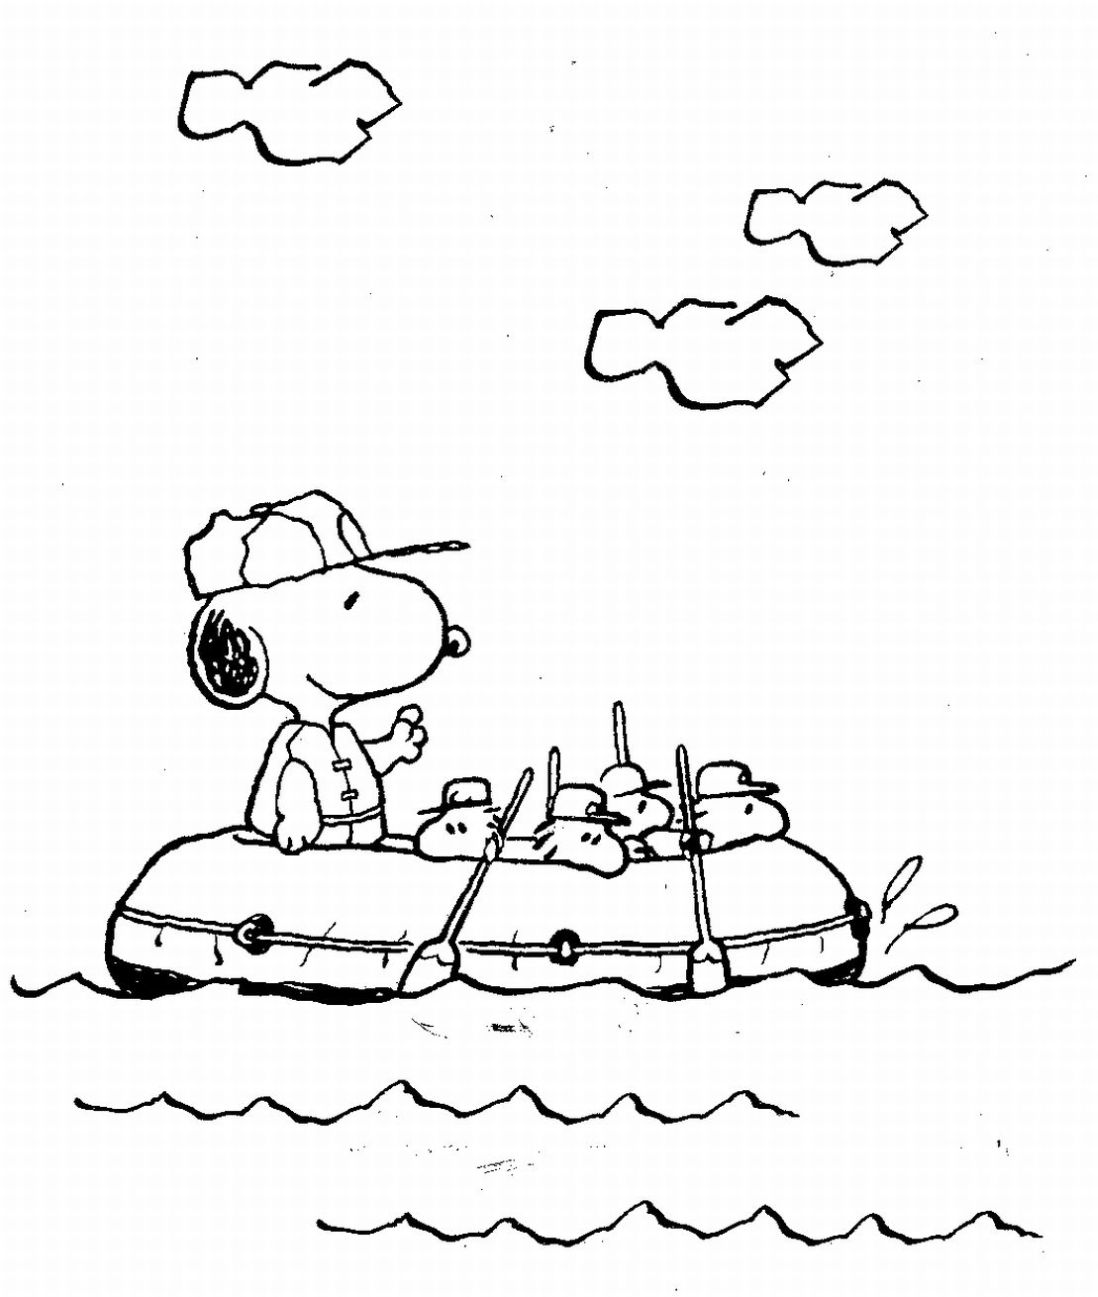 peanuts characters coloring pages